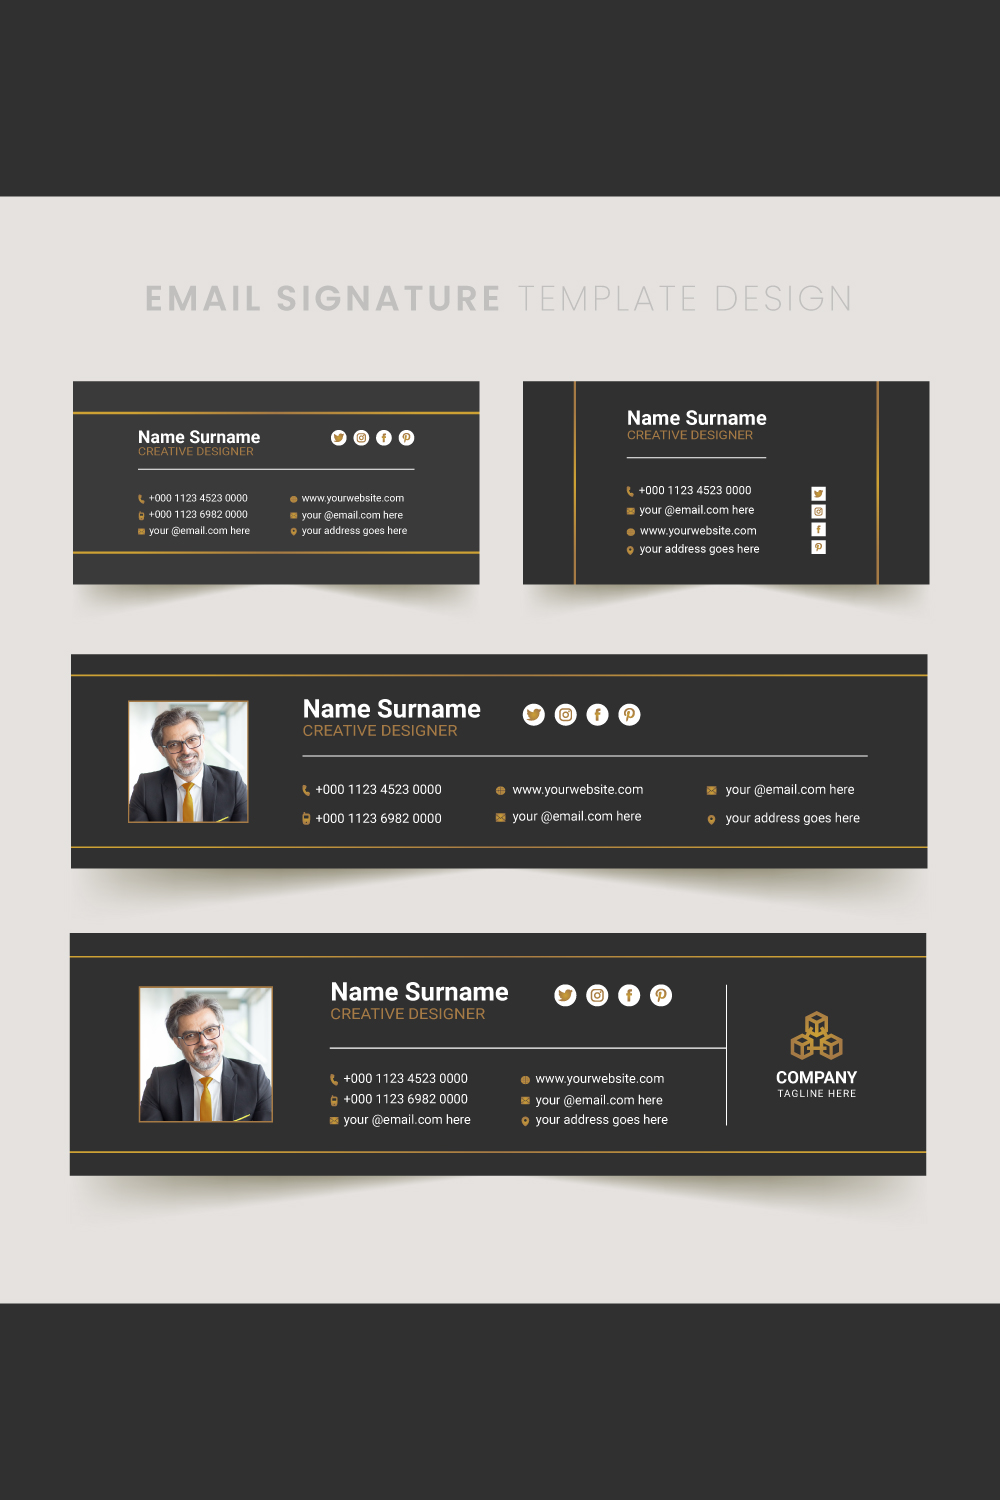 Corporate Business Email Signature Template set pinterest image.